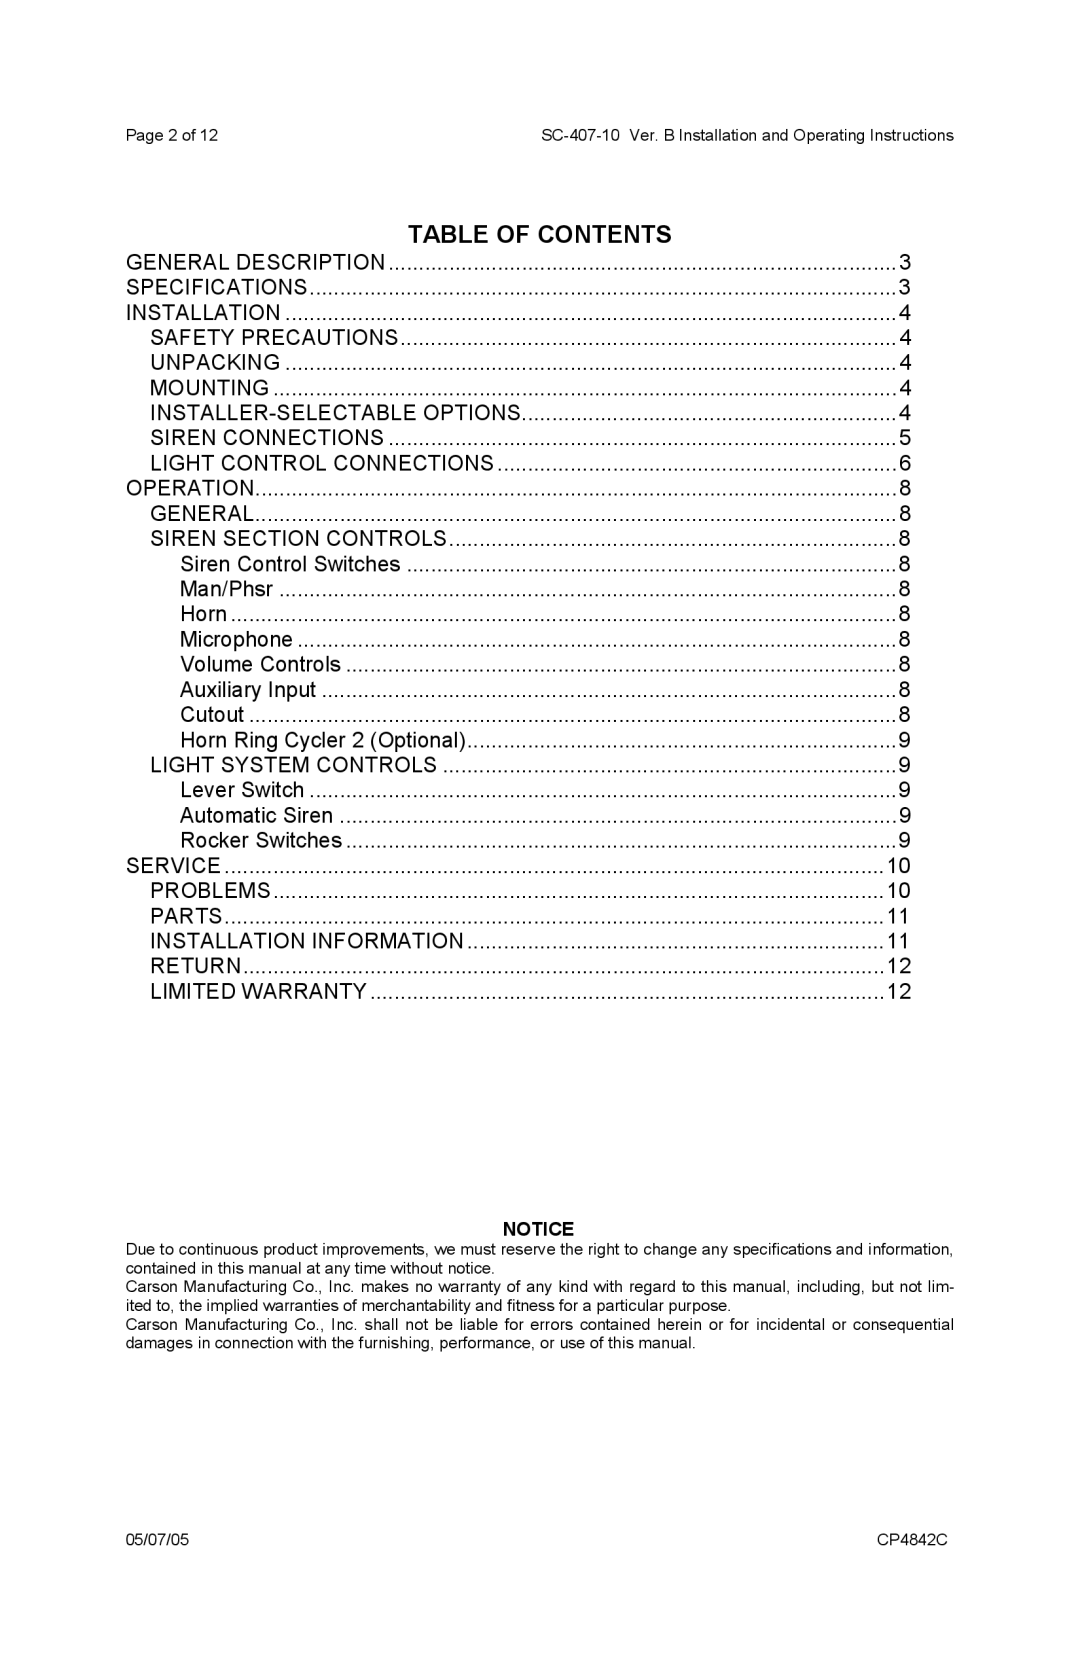 Carson SC-407 operating instructions Table Of Contents 